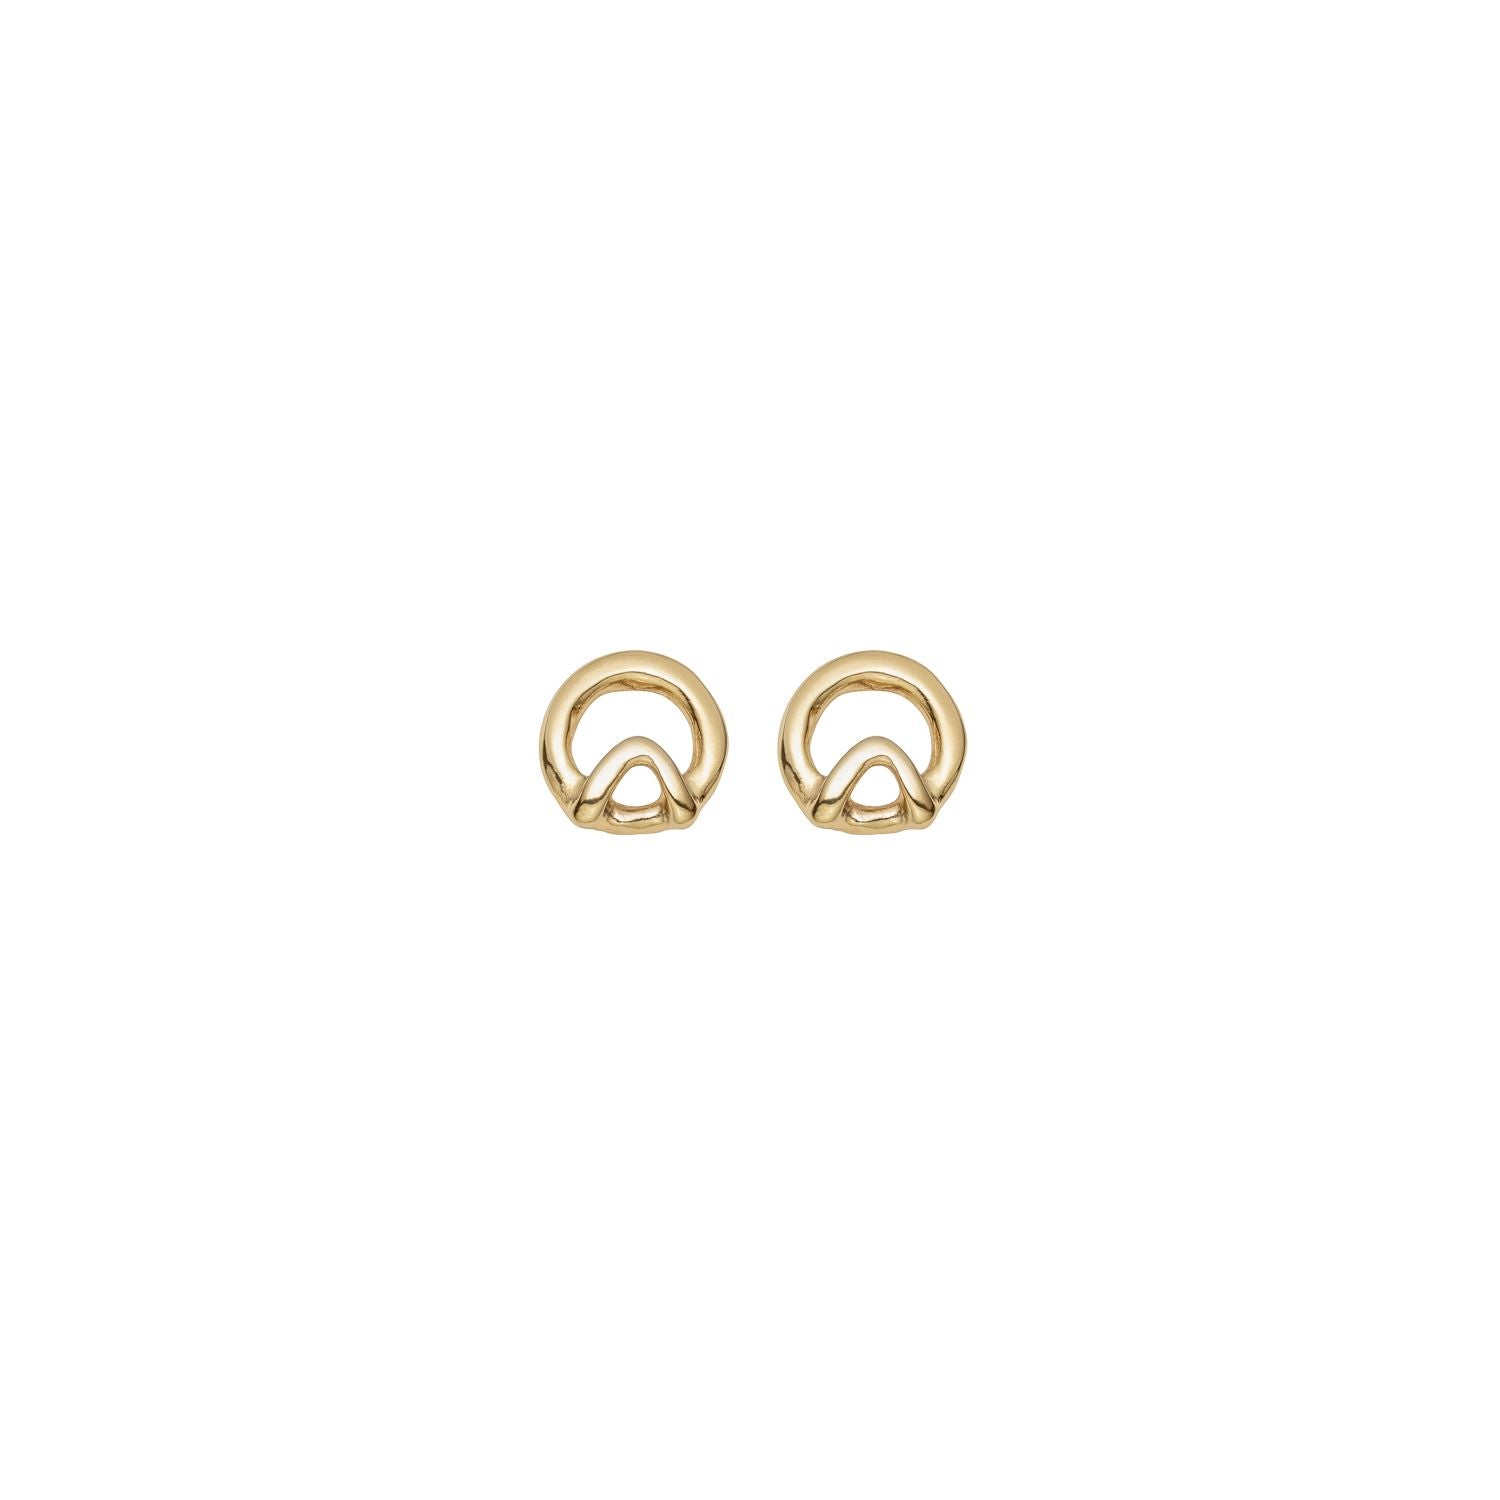 Uno de 50 Game of Three Earrings - Gold